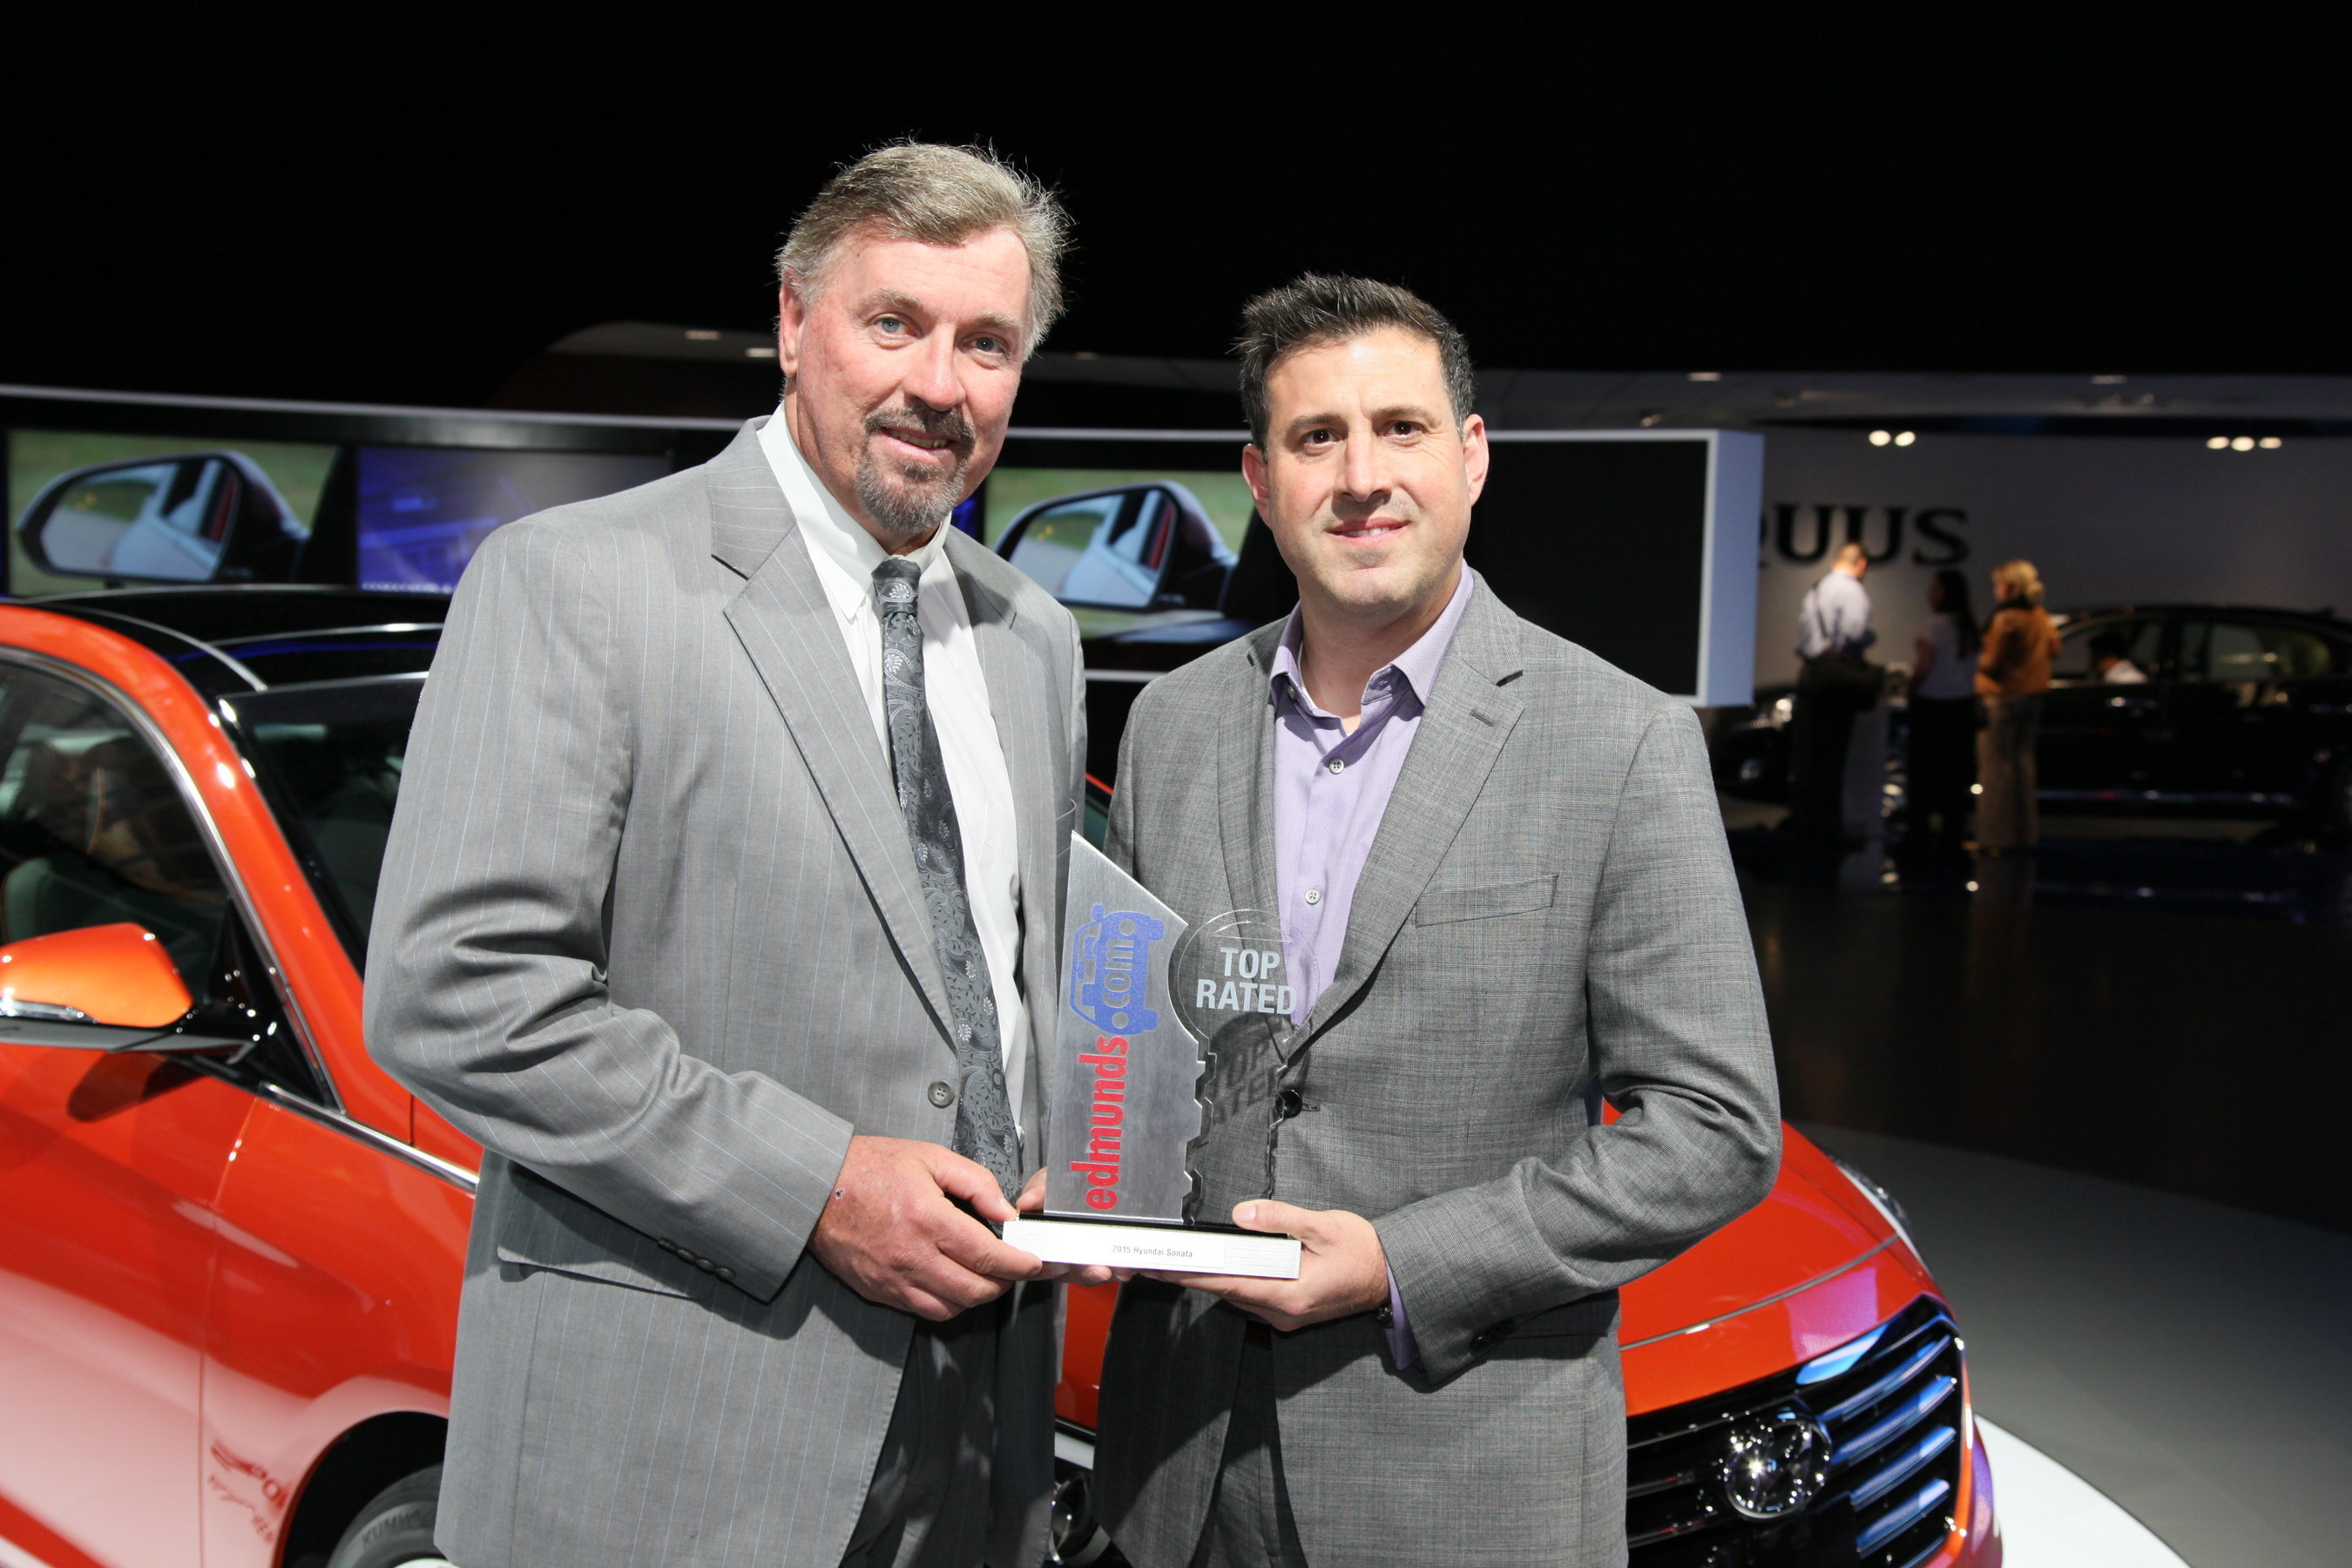 Dave Zuchowski, president and CEO, Hyundai Motor America receives the Edmunds.com Top Rated Vehicle award for the 2015 Sonata from Scott Oldham, editor in chief, Edmunds.com.